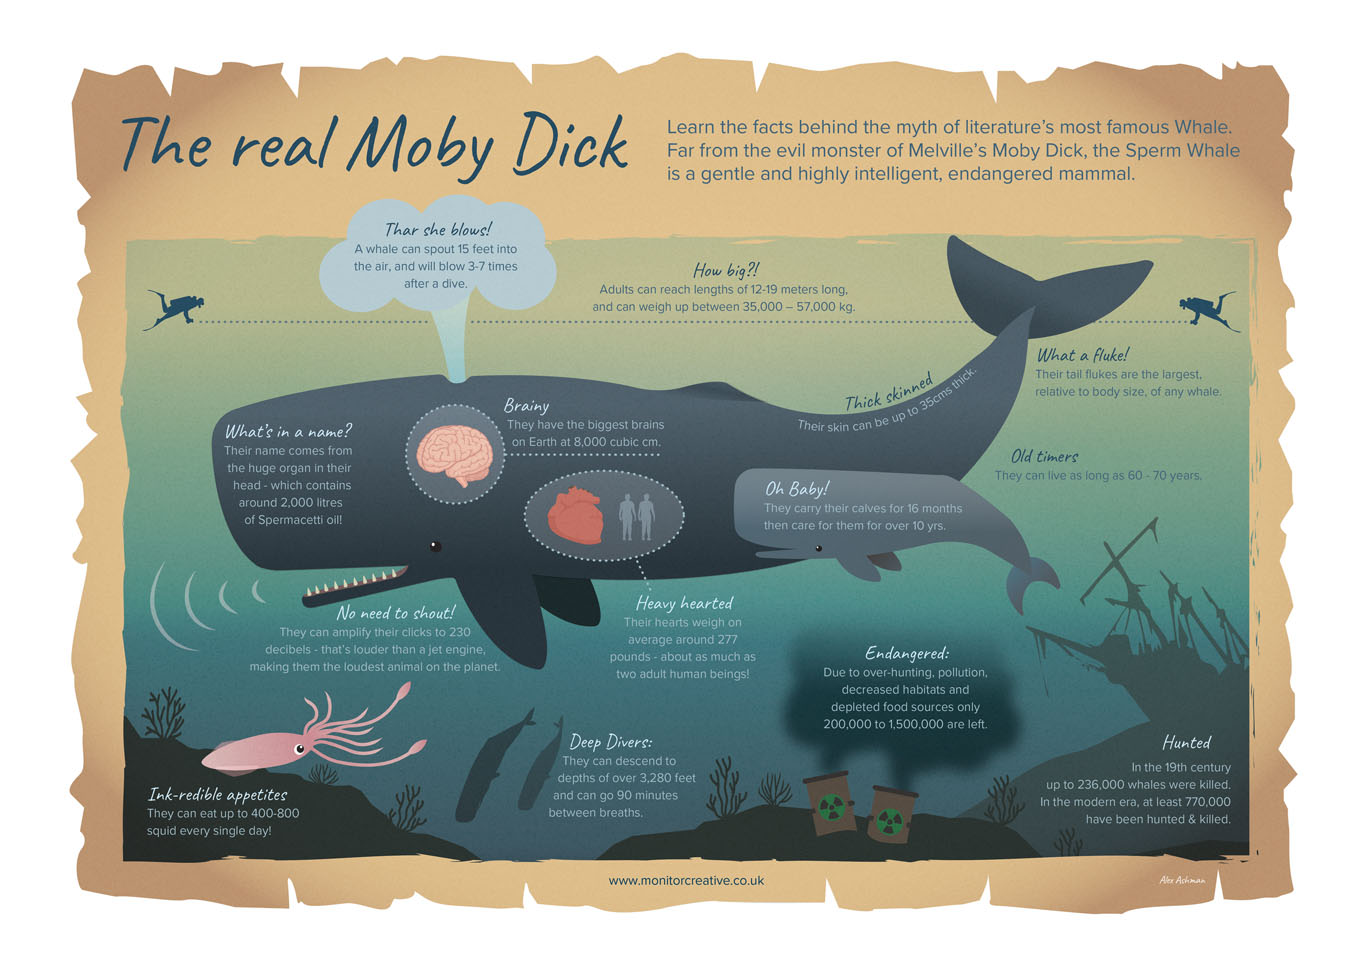 What was the meaning behind moby dick